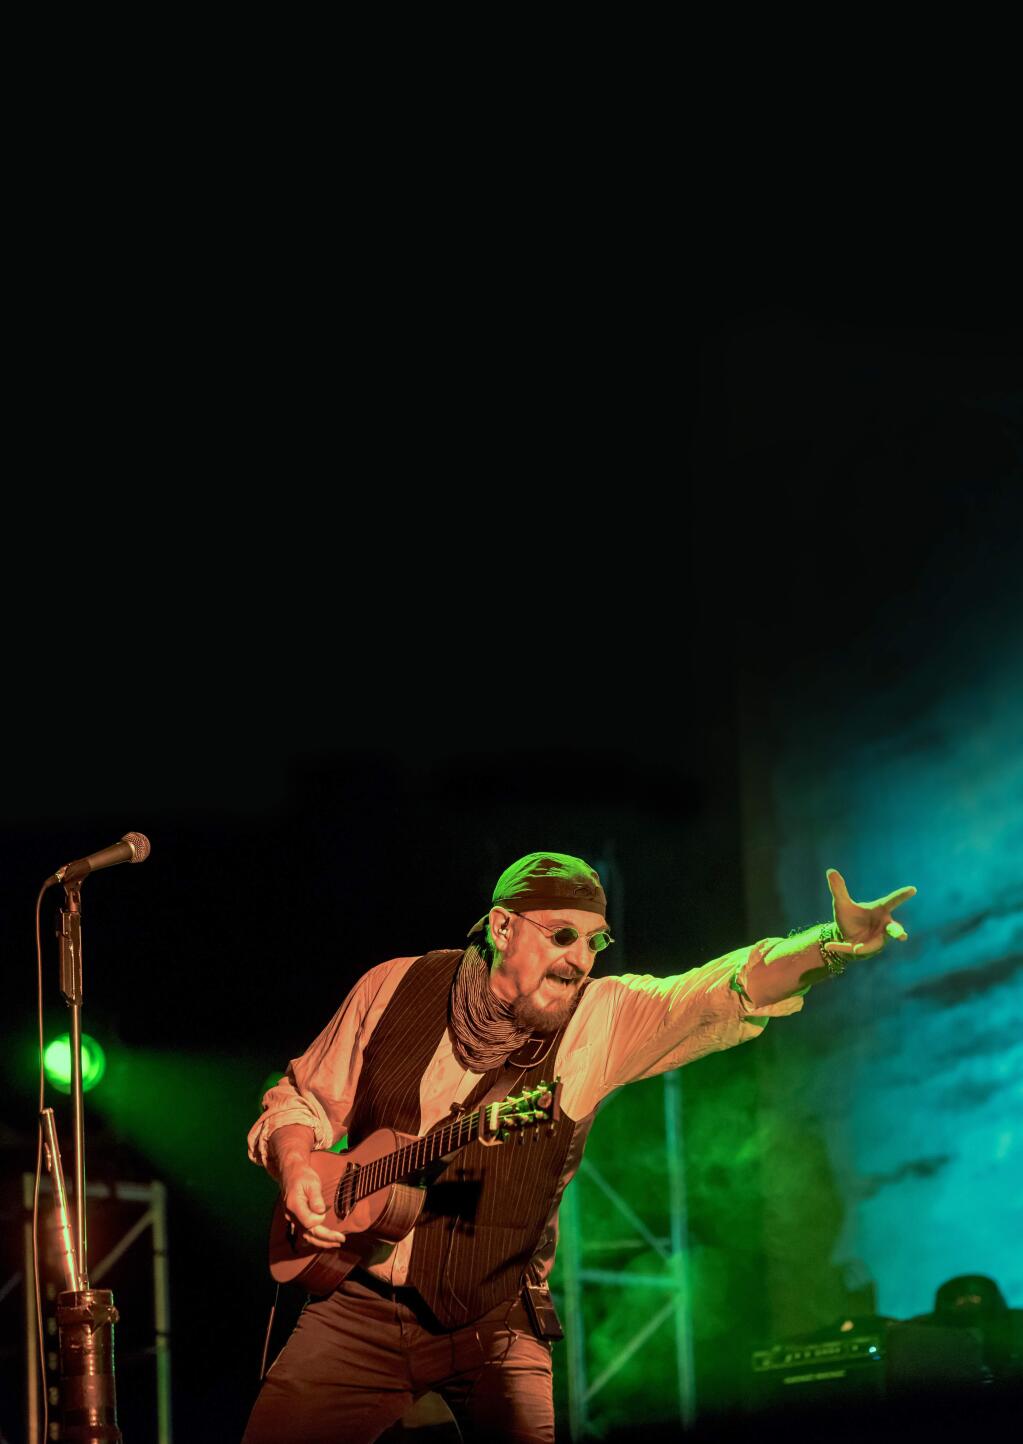 Ian Anderson, musician, singer, songwriter and multi-instrumentalist best known for his work as the lead vocalist, flutist and acoustic guitarist of British rock band Jethro Tull. (Photo by Nick Harrison)